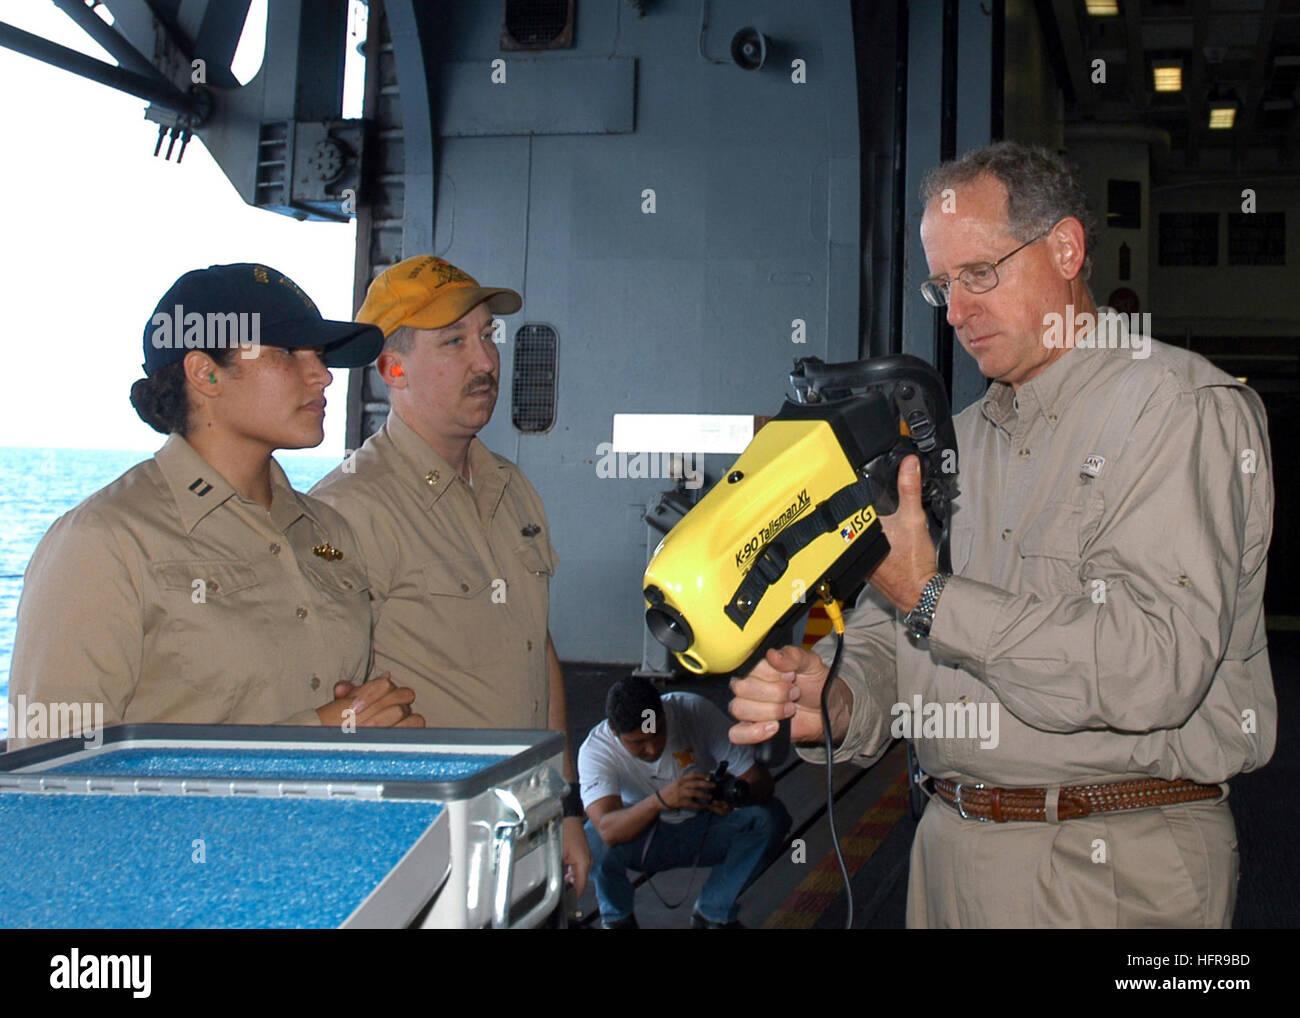 060827-N-3557N-046  Caribbean Sea  (Aug. 27, 2006) - In the hangar bay aboard the amphibious assault ship USS Kearsarge (LHD 3), Congressman Mike Conaway-(R), 11th Congressional District of Texas, inspects a K-90 Talisman thermal imaging system. The K-90 is used by the Navy to detect fires in smoke filled spaces shipboard ship. Rep. Conaway was aboard Kearsarge to observe operations while participating in PANAMAX 2006, a multi-national exercise tailored to training civil and military forces for interoperability in support of the Government of Panama to protect and guarantee safe passage throug Stock Photo